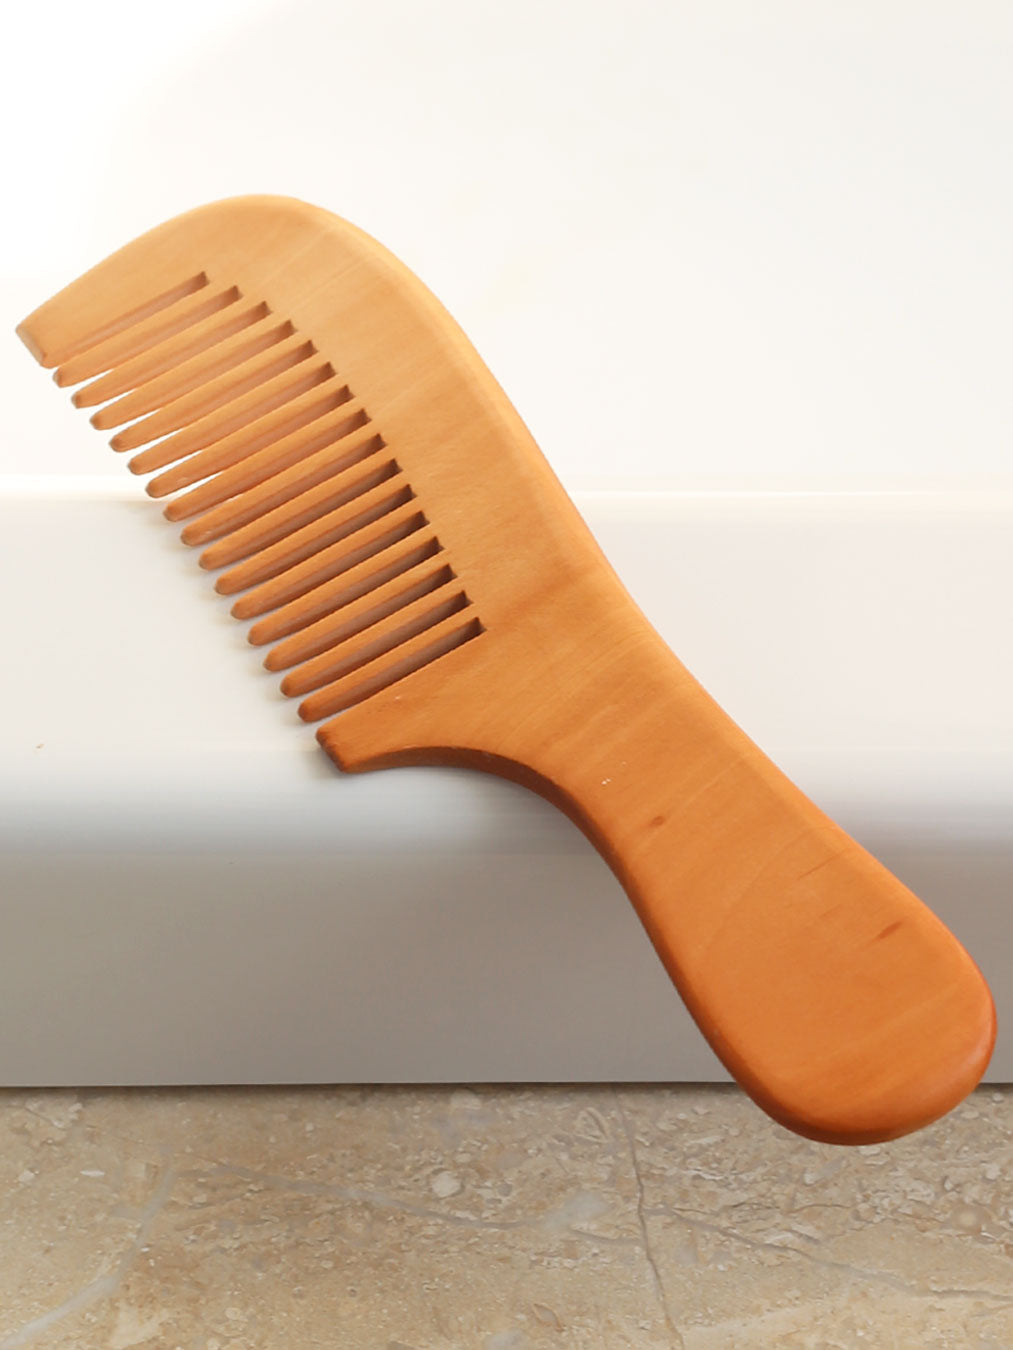 Natural wooden comb set of of wide and fine tooth, set of 2